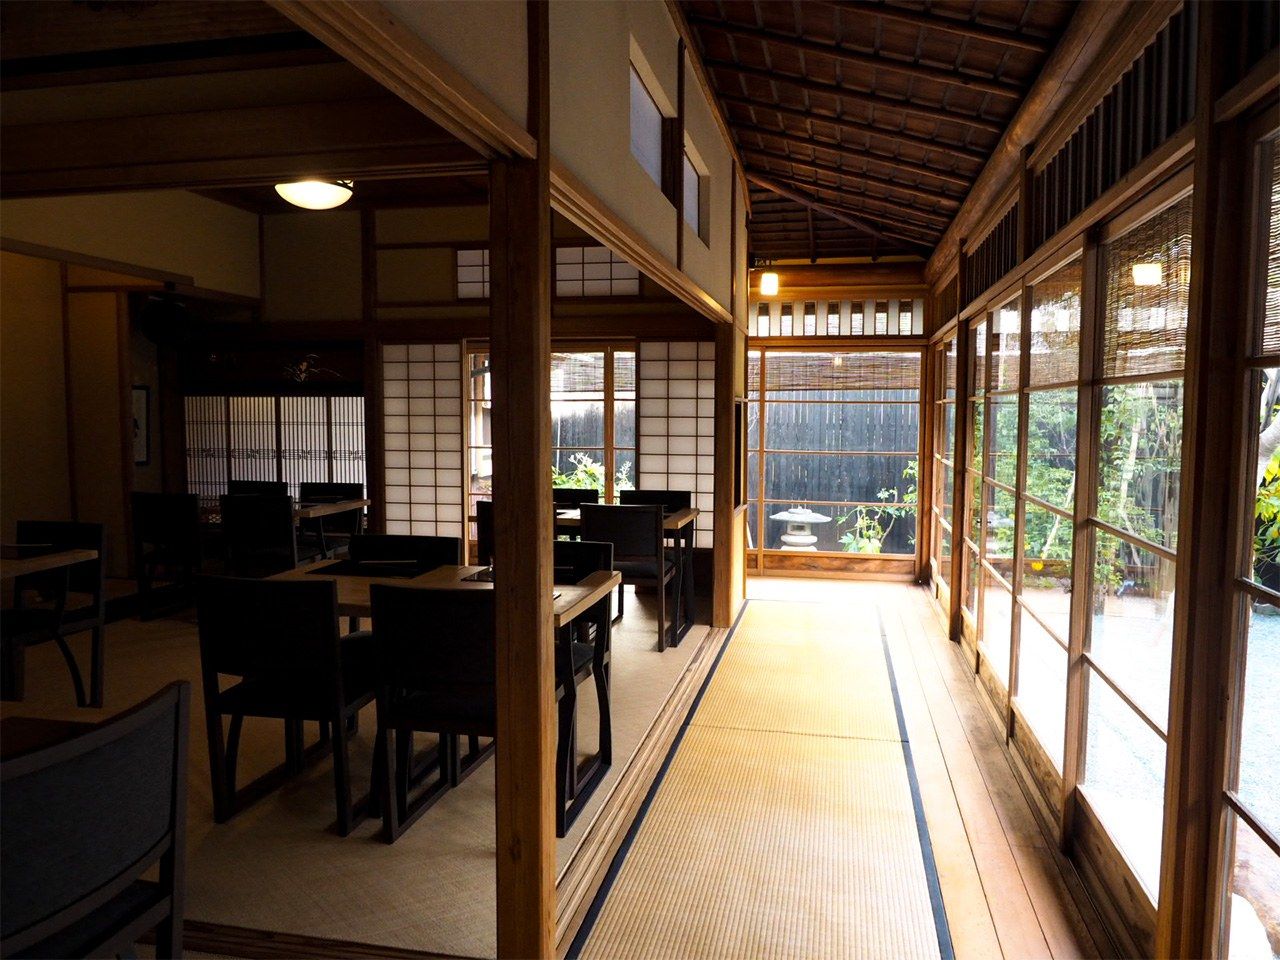 The engawa has tatami mats rather than bare wood, which is typical of old residences of politicians and other prominent figures.